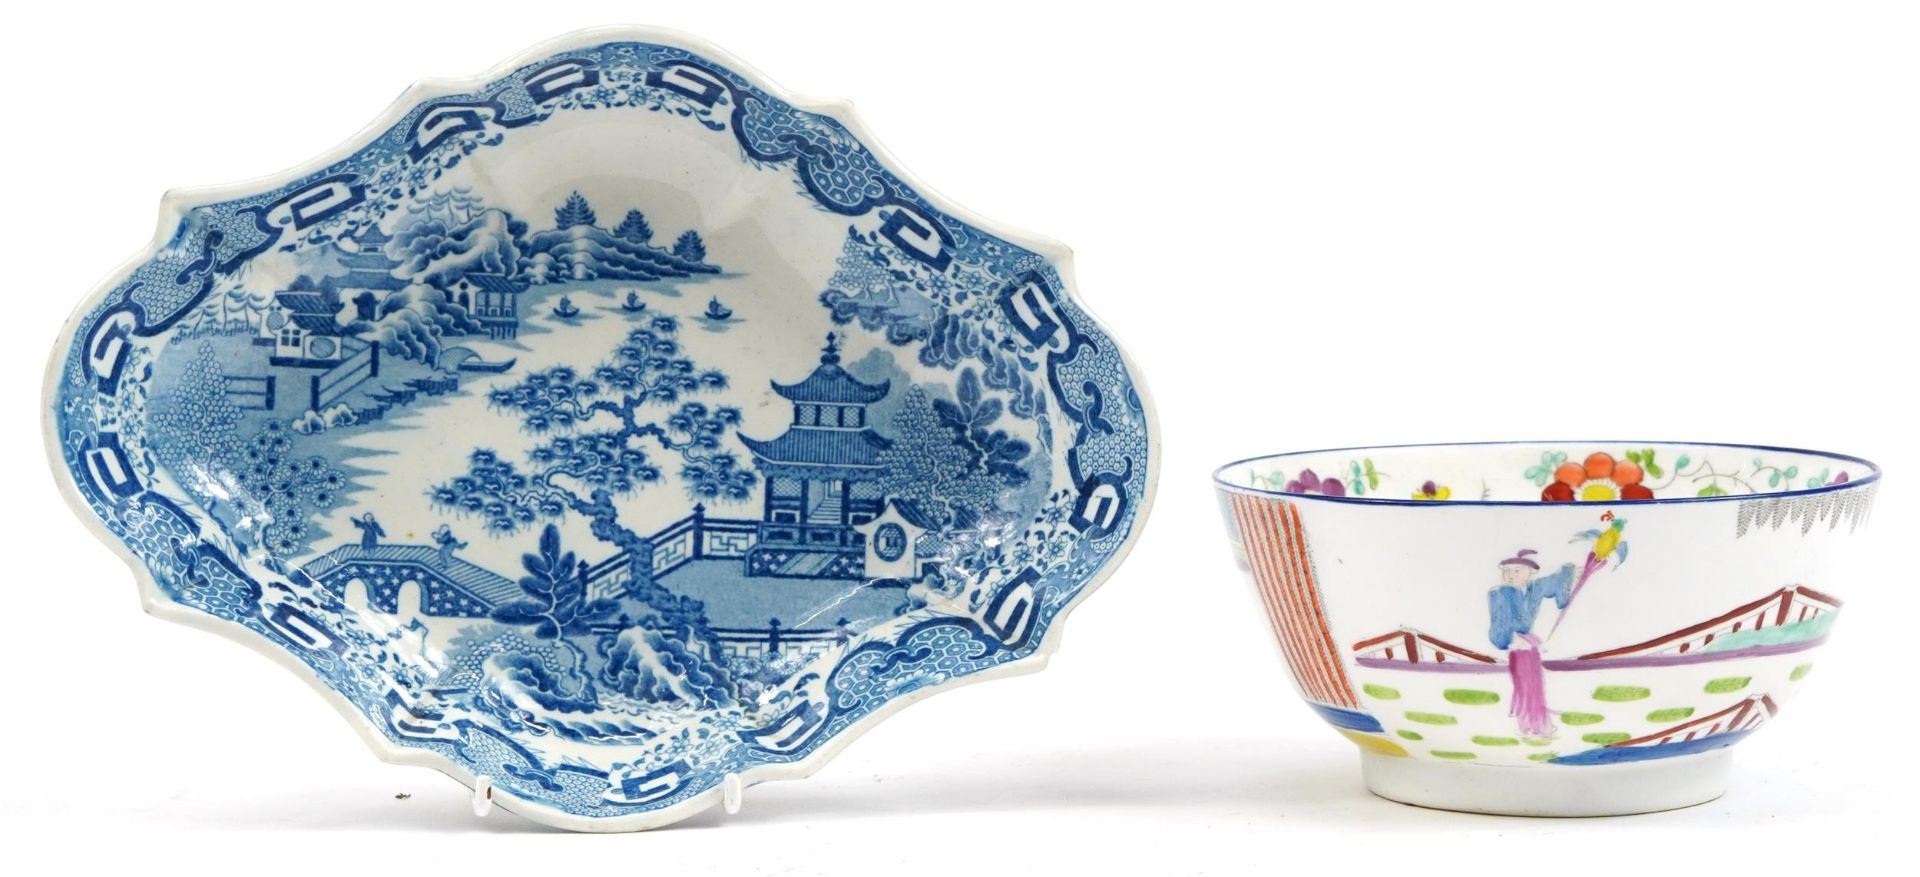 19th century blue and white pottery dish printed in the chinoiserie manner and a hand painted